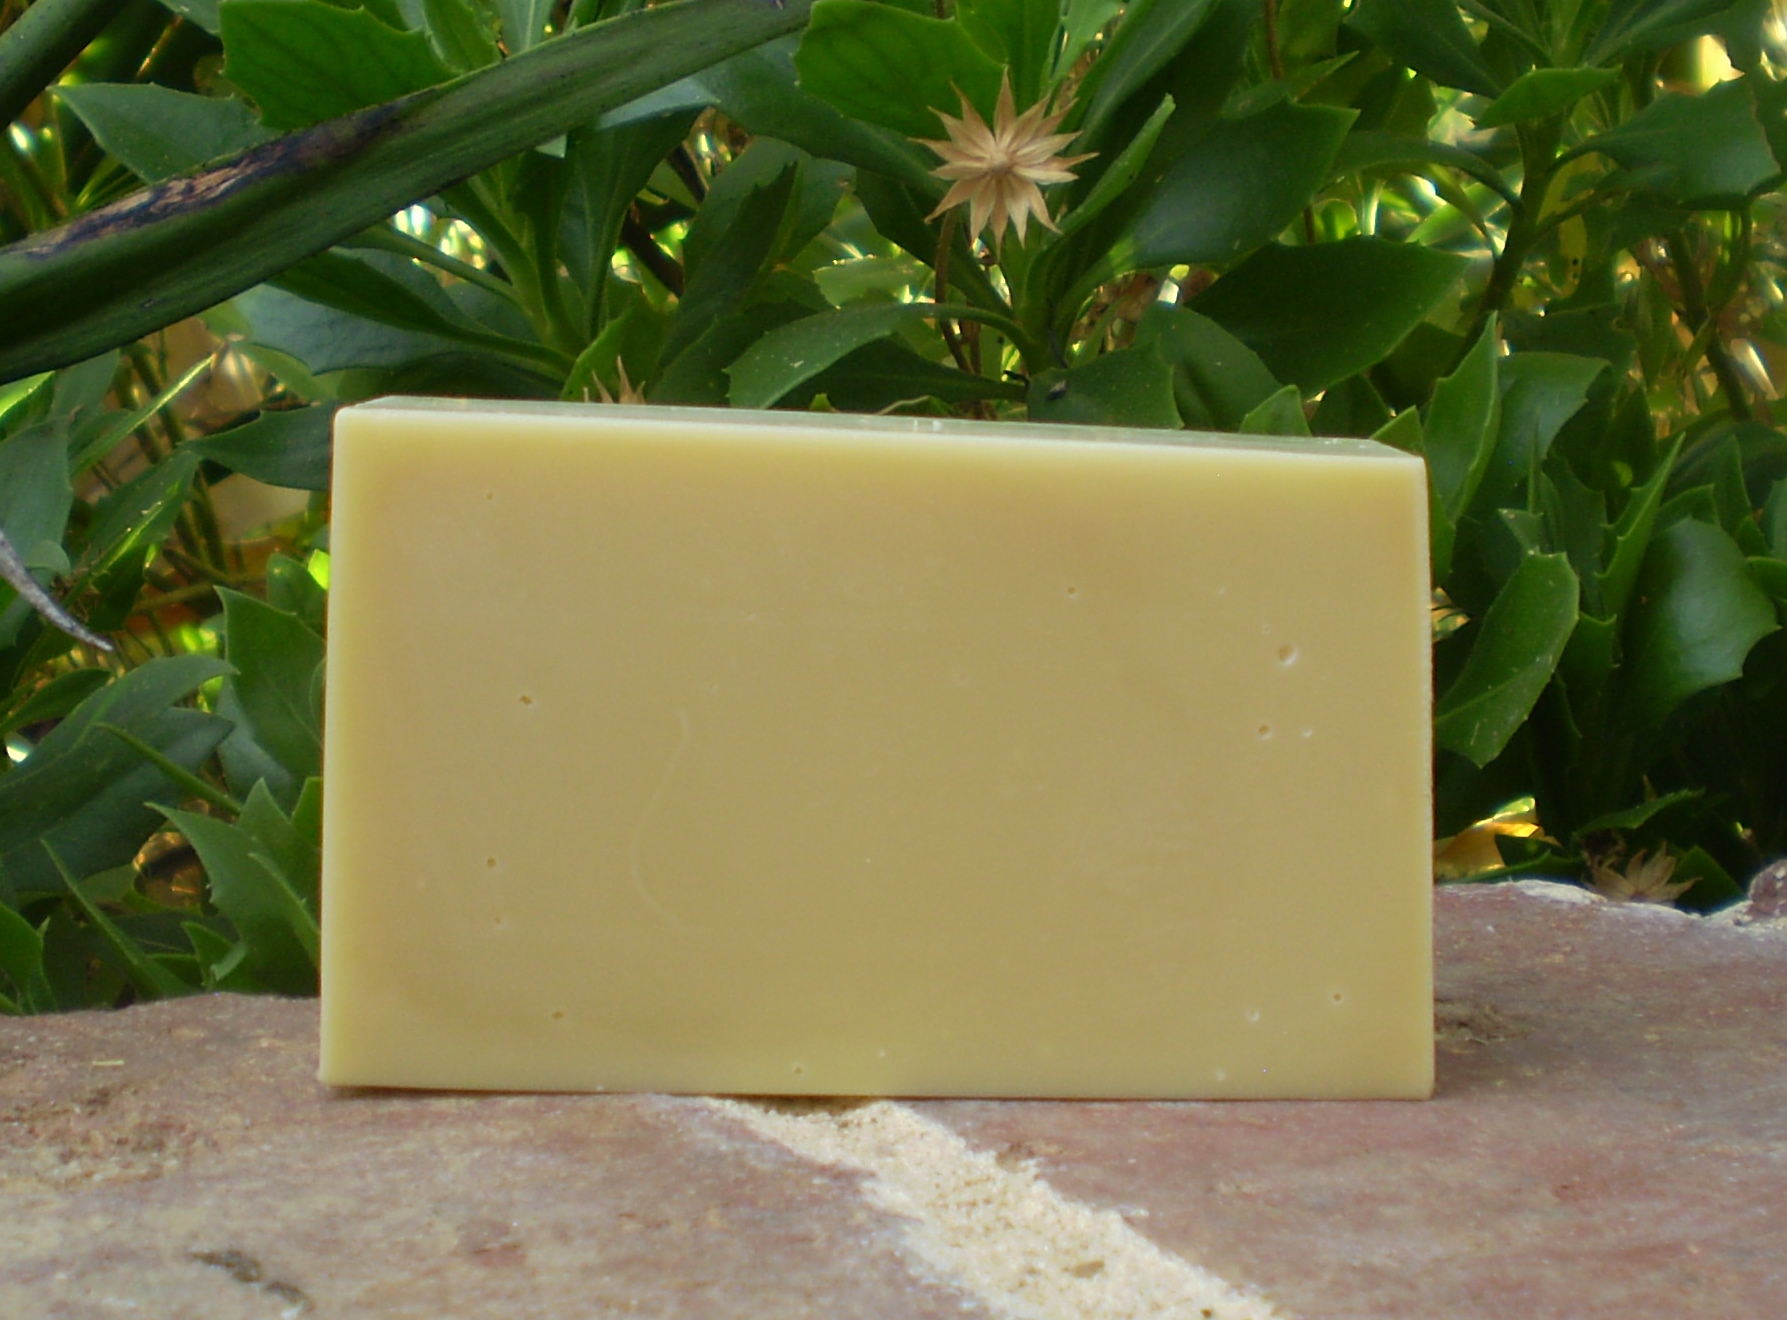 100 Pure Organic Olive Oil Soap 100 Natural